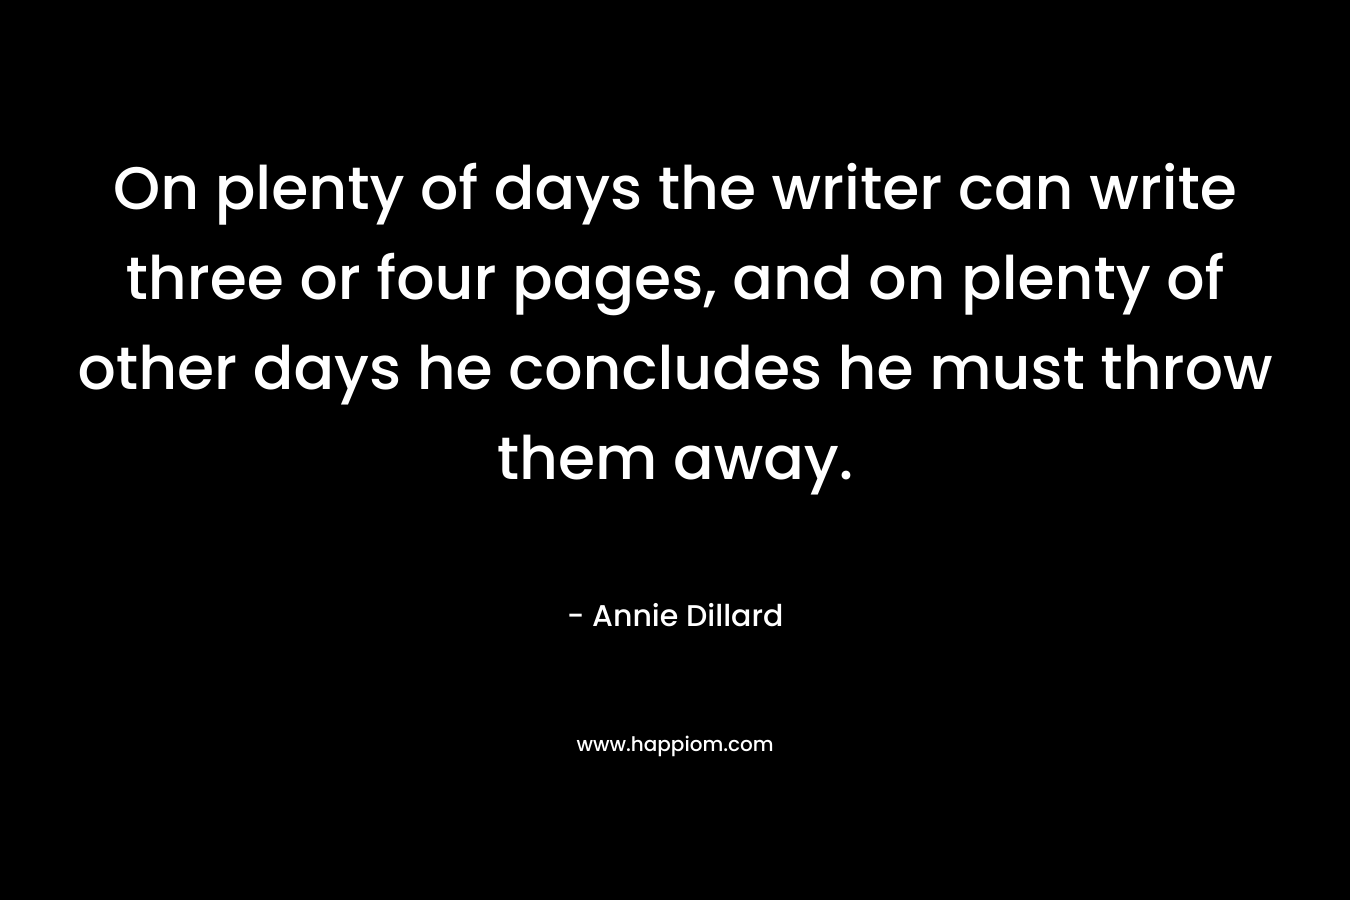 On plenty of days the writer can write three or four pages, and on plenty of other days he concludes he must throw them away. – Annie Dillard